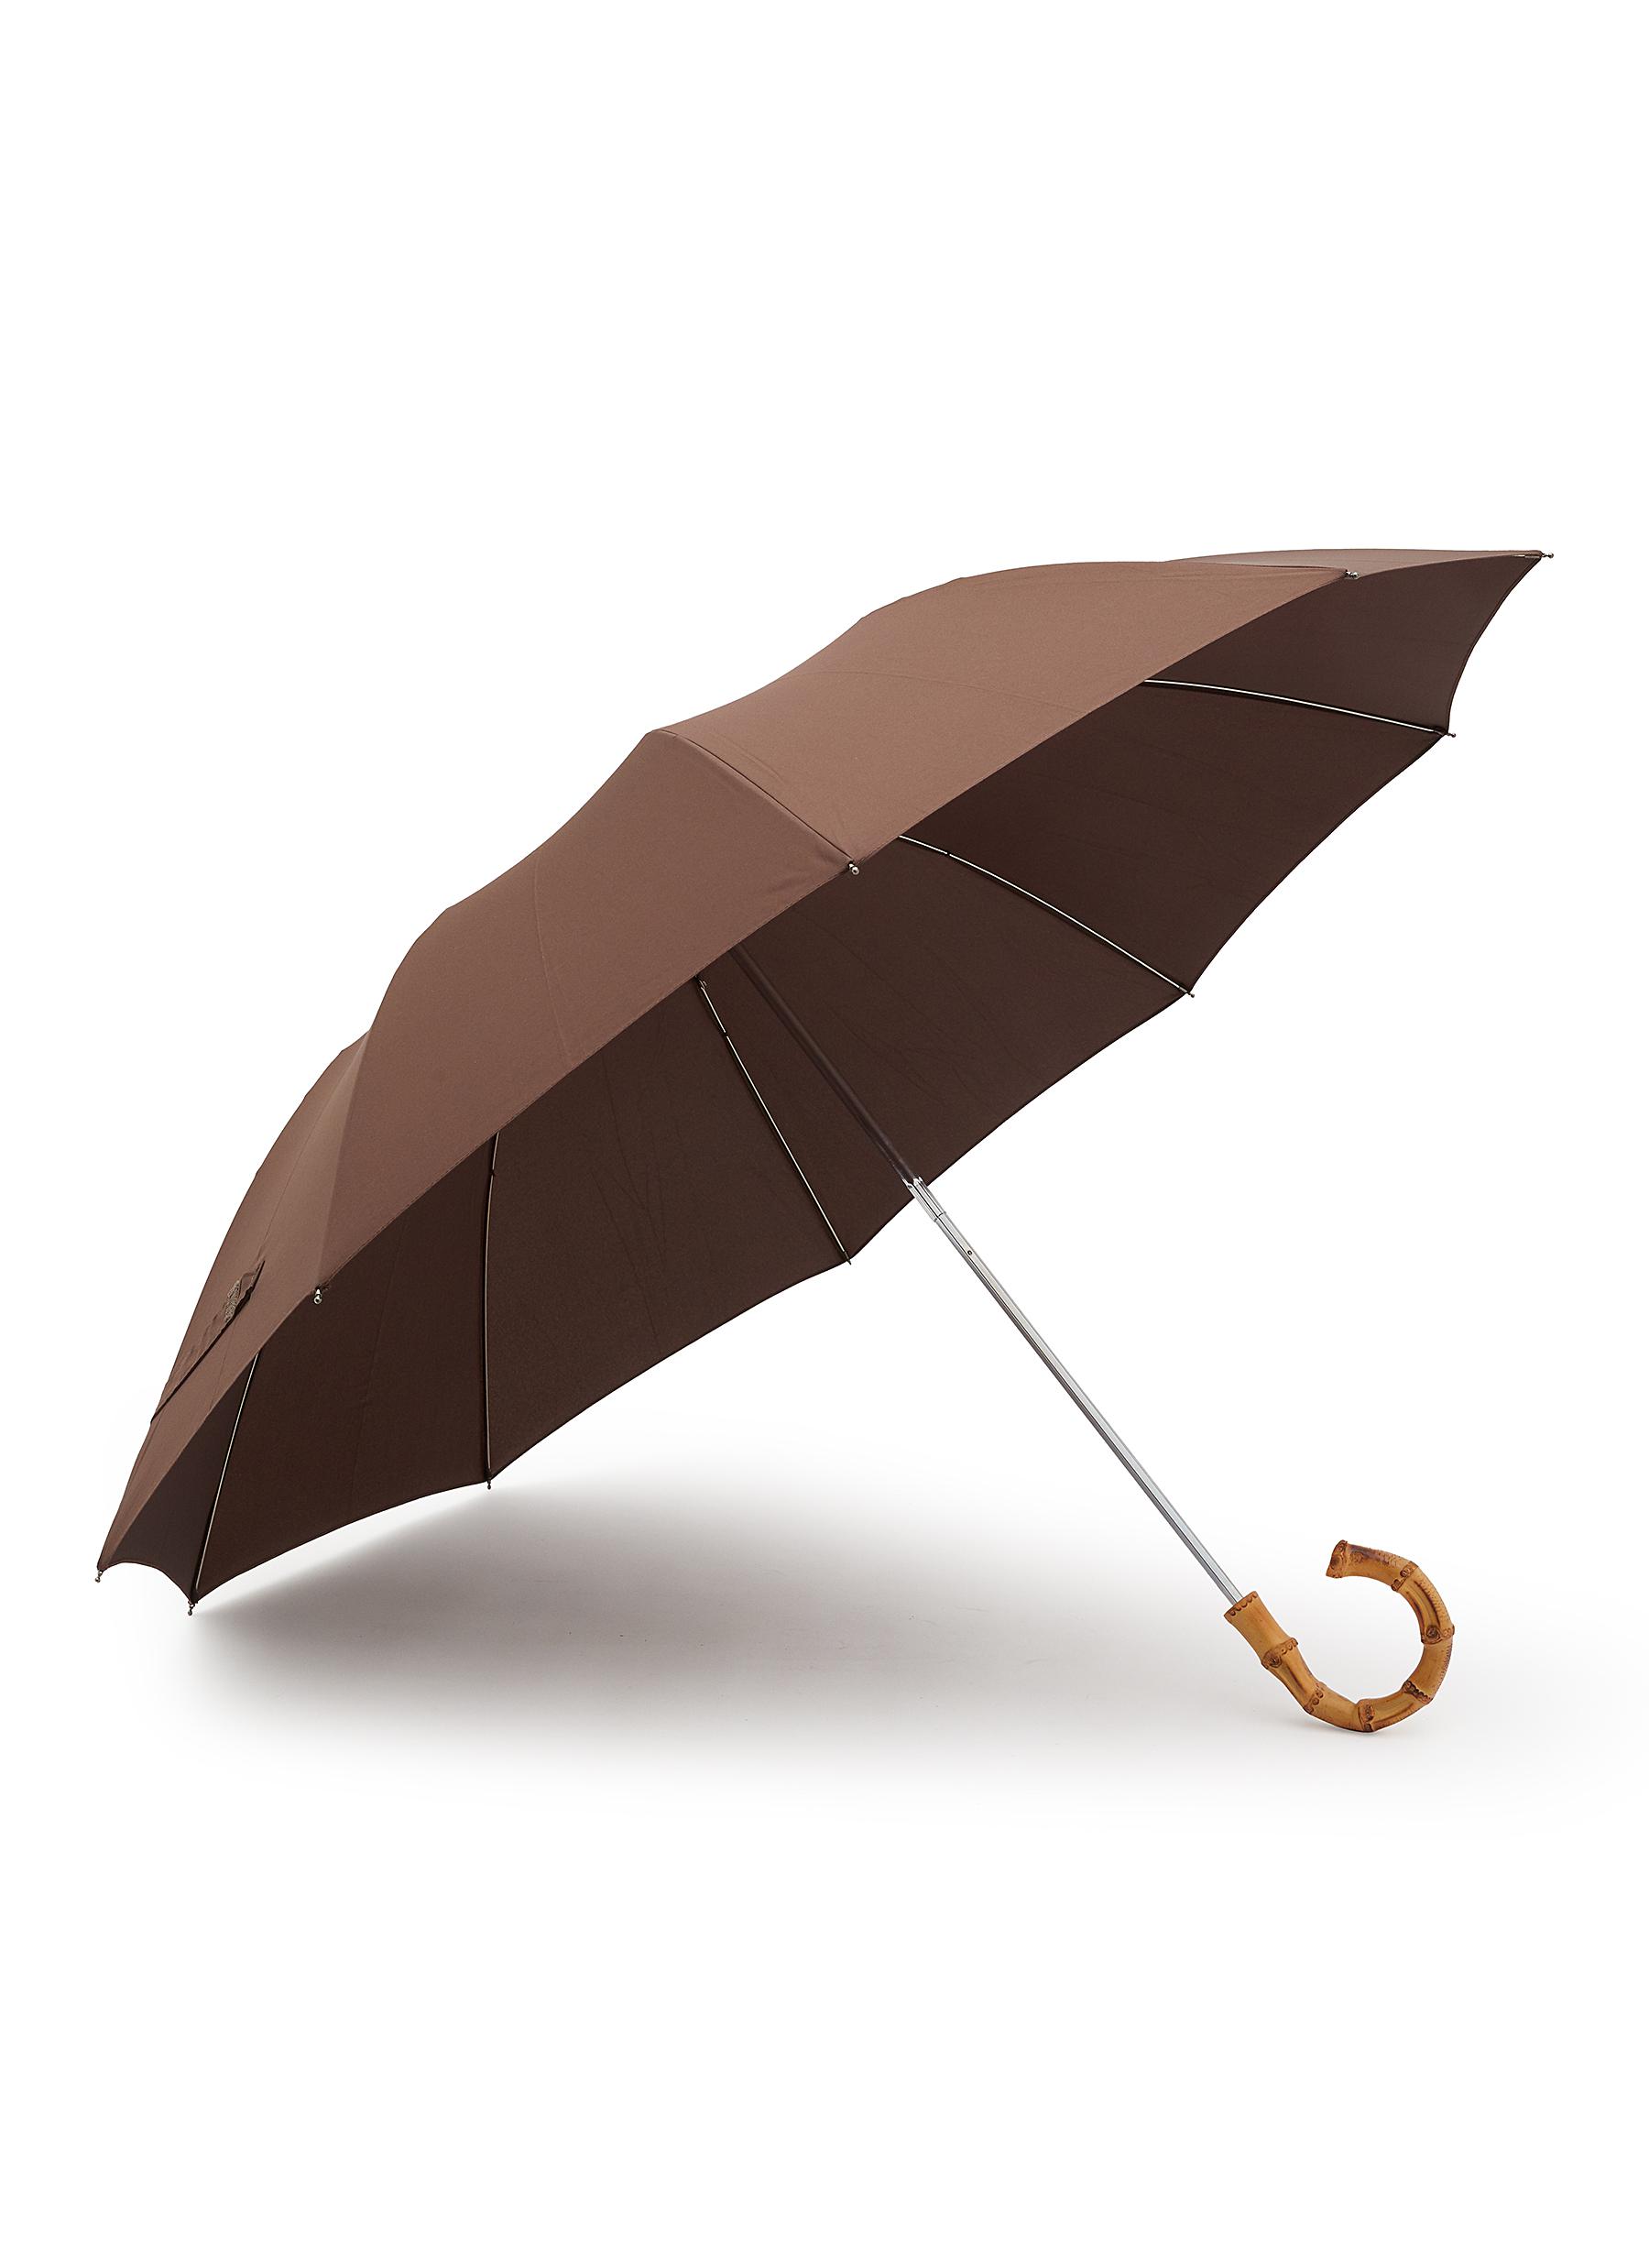 SCORCHED WHANGEE CROOK HANDLE M.BAND TELESCOPIC UMBRELLA